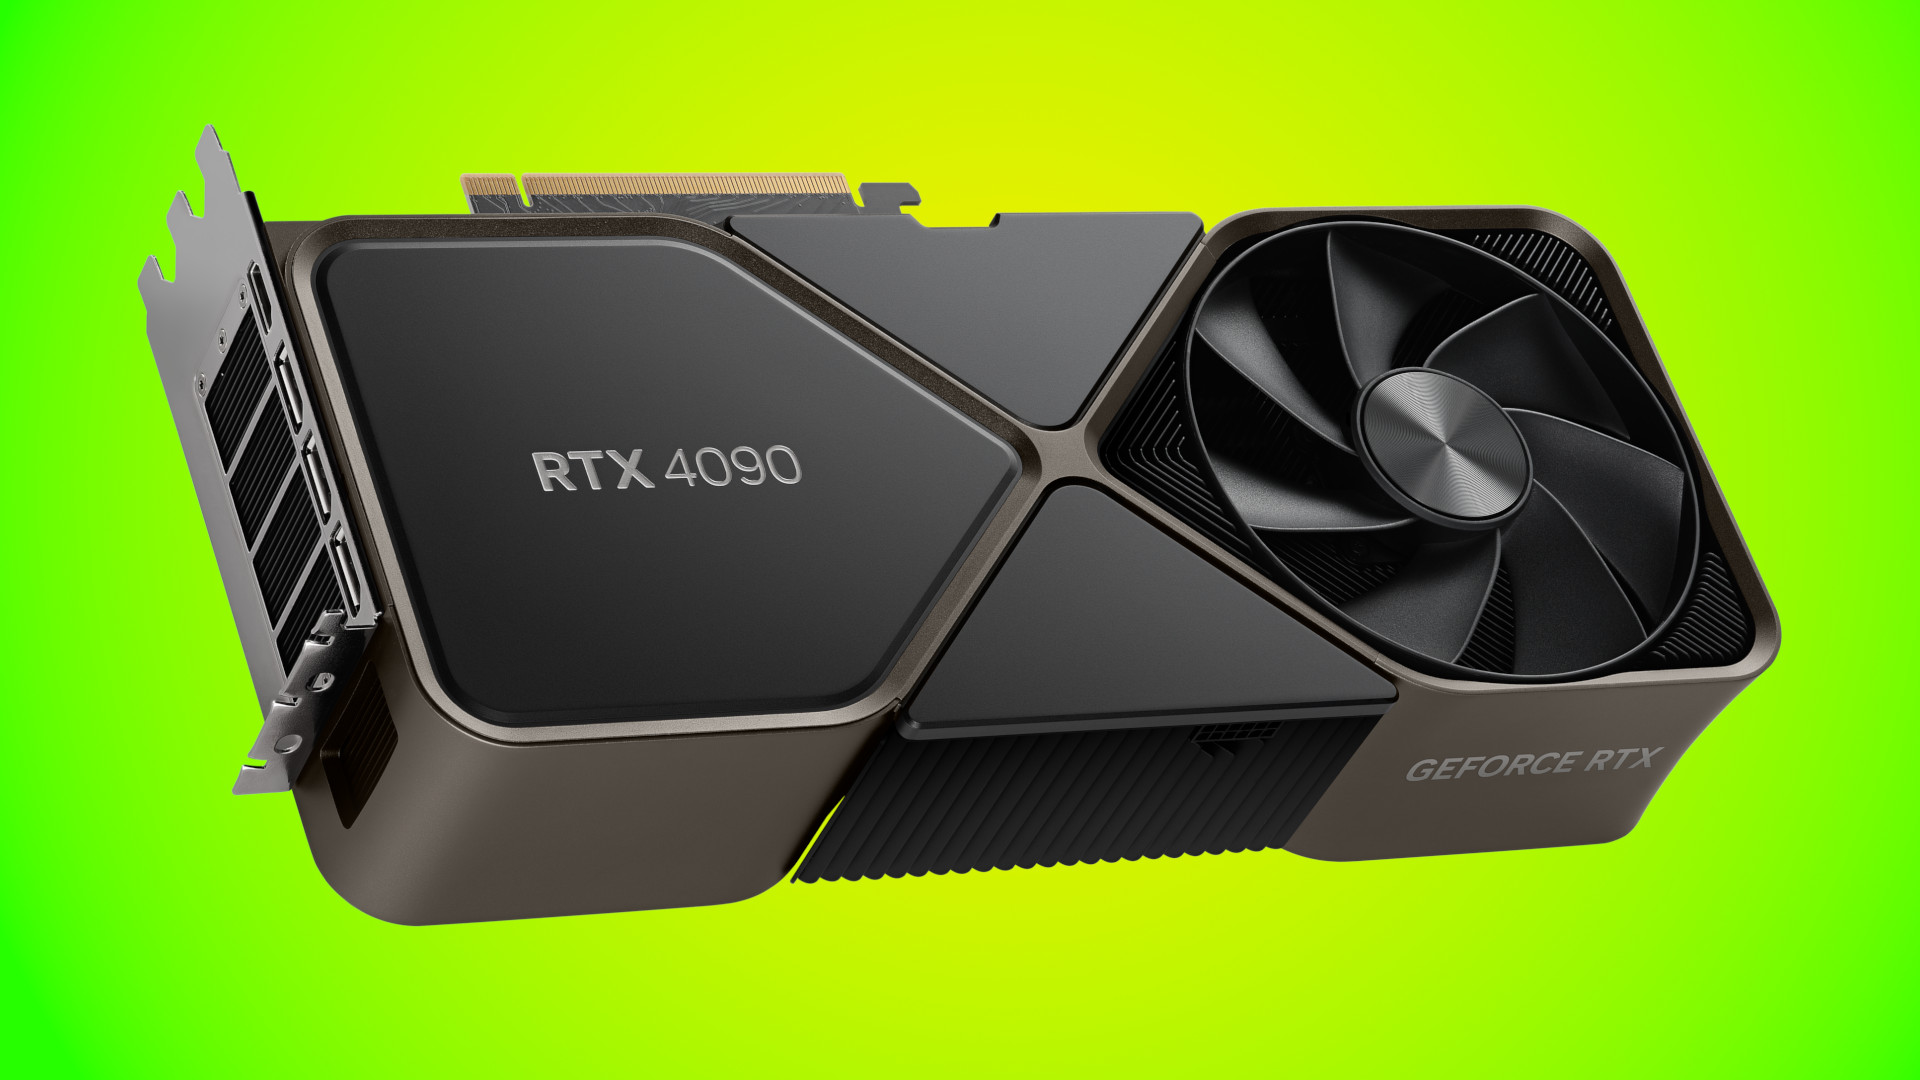 GeForce RTX 4090 GPUs may also be damaging native 16 pin power cables